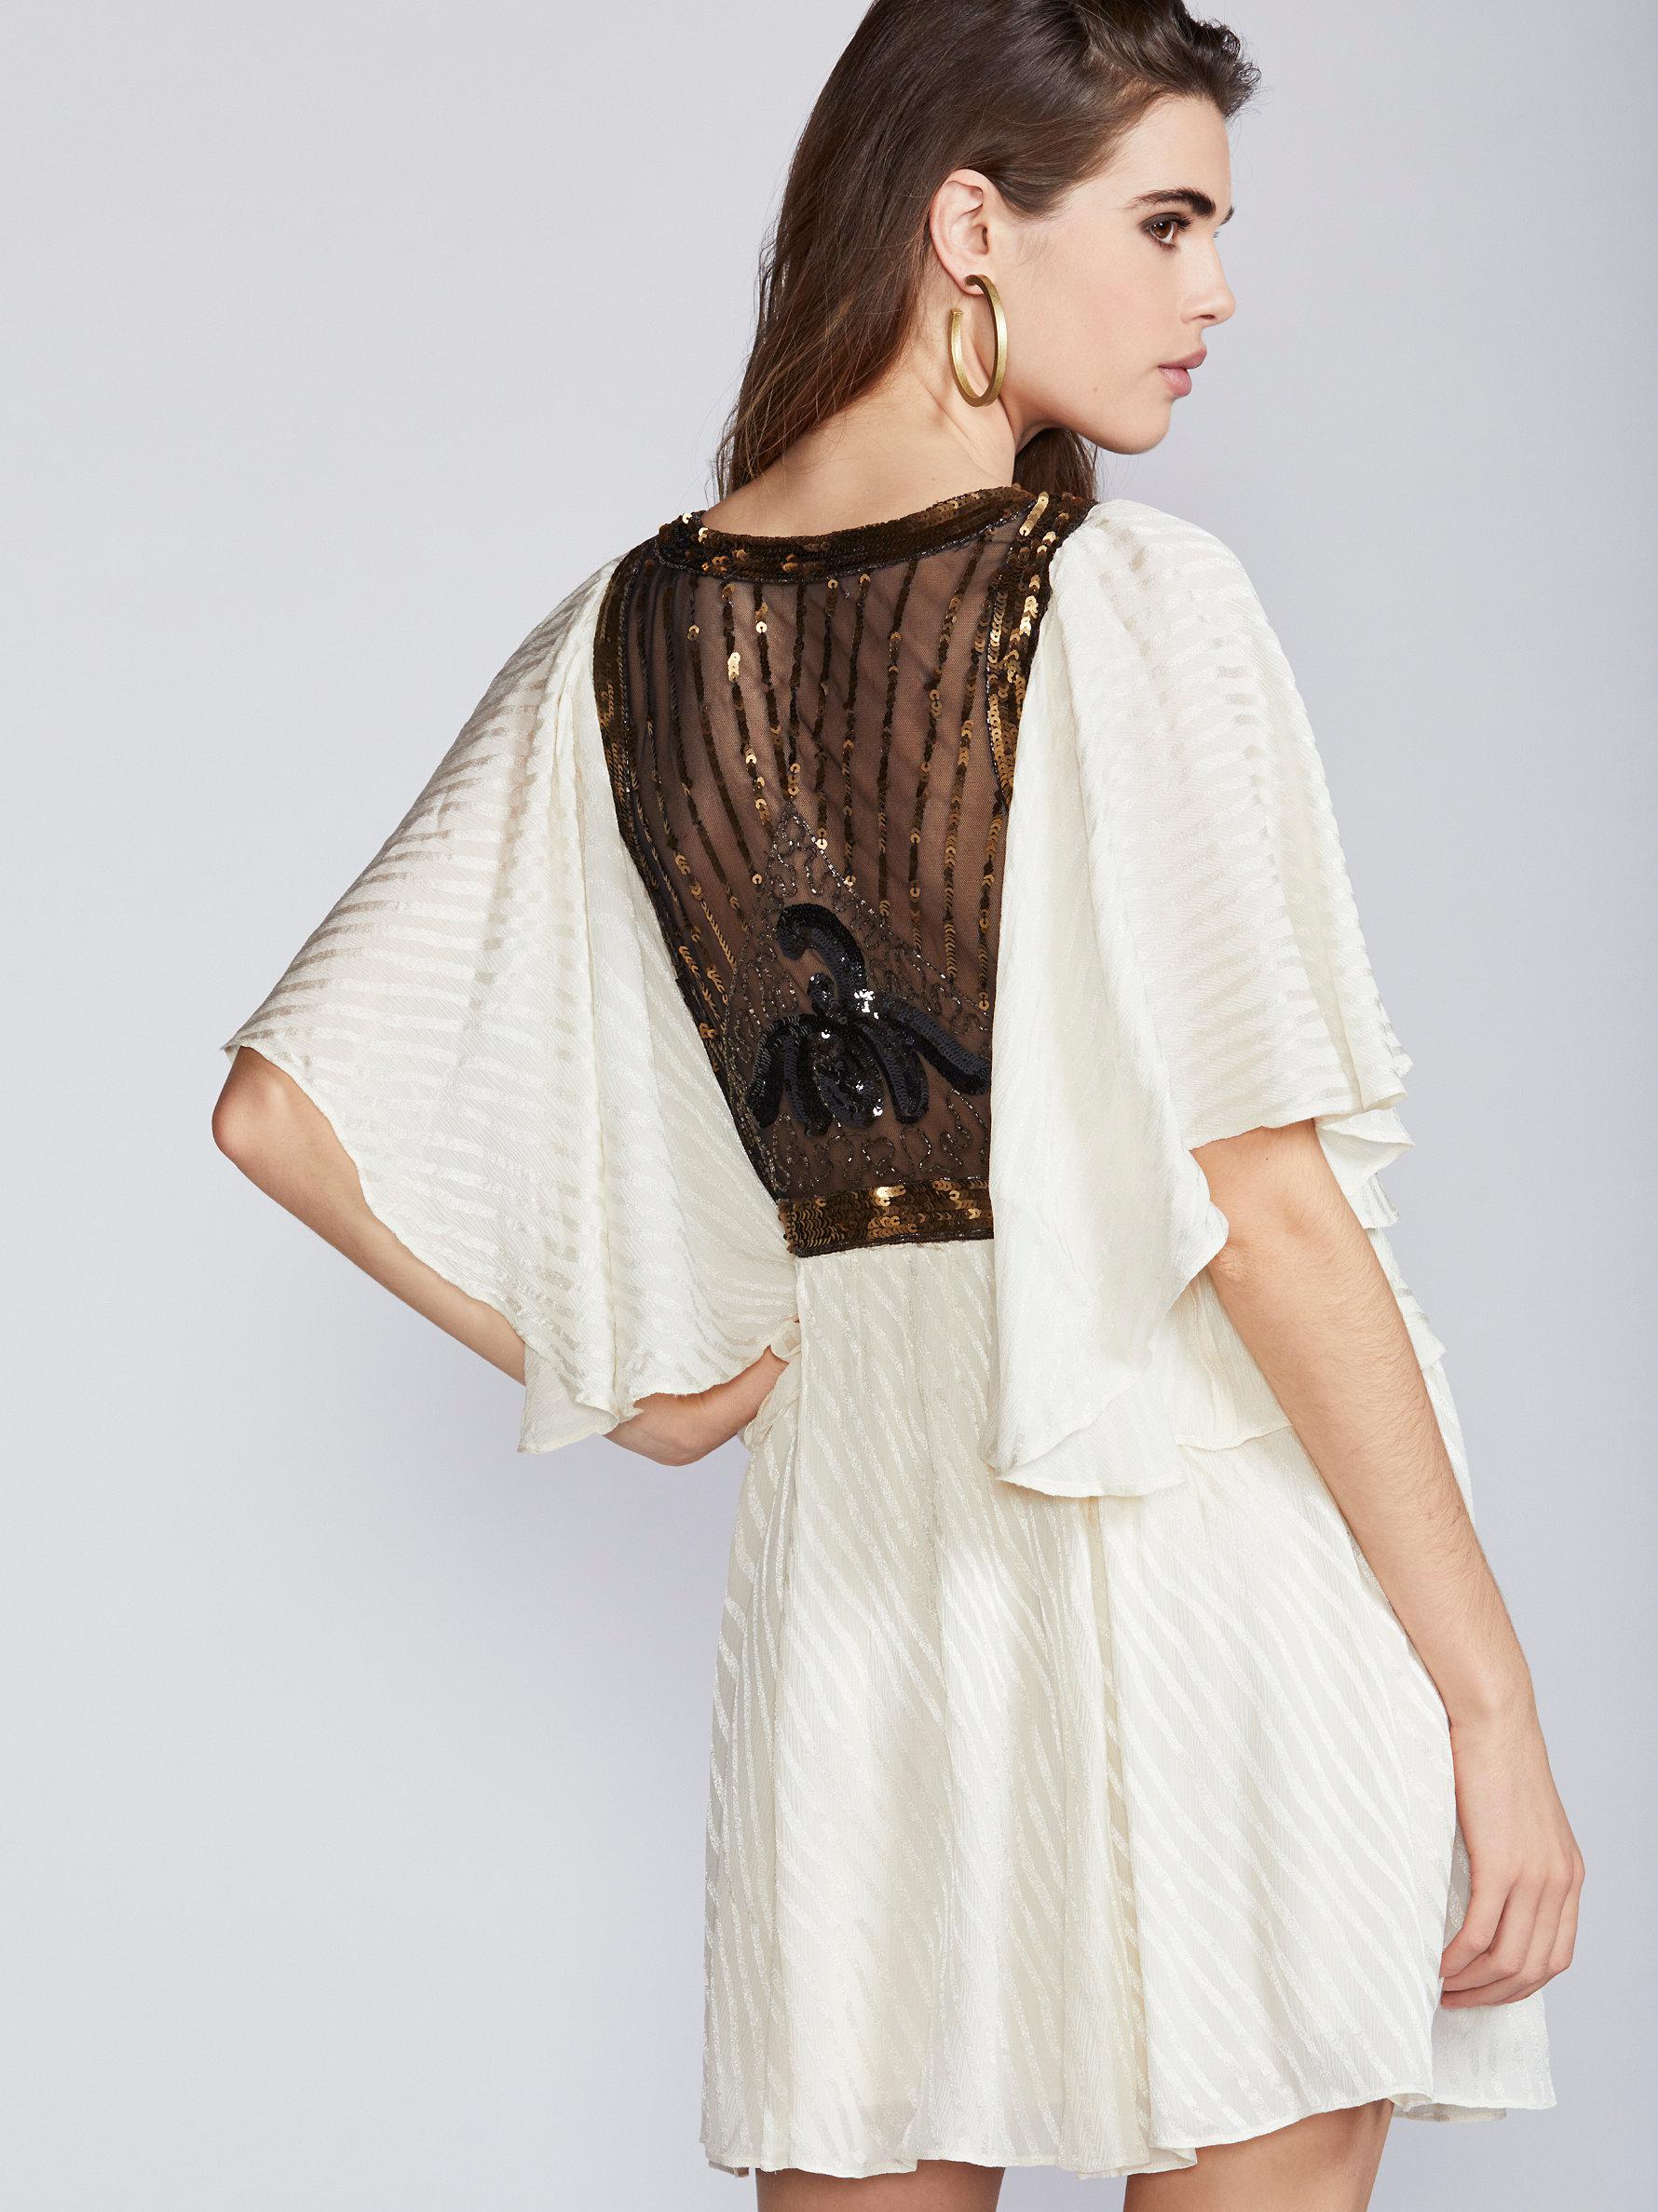 Free People Synthetic Moonglow Embellished Mini Dress in Ivory (White) -  Lyst